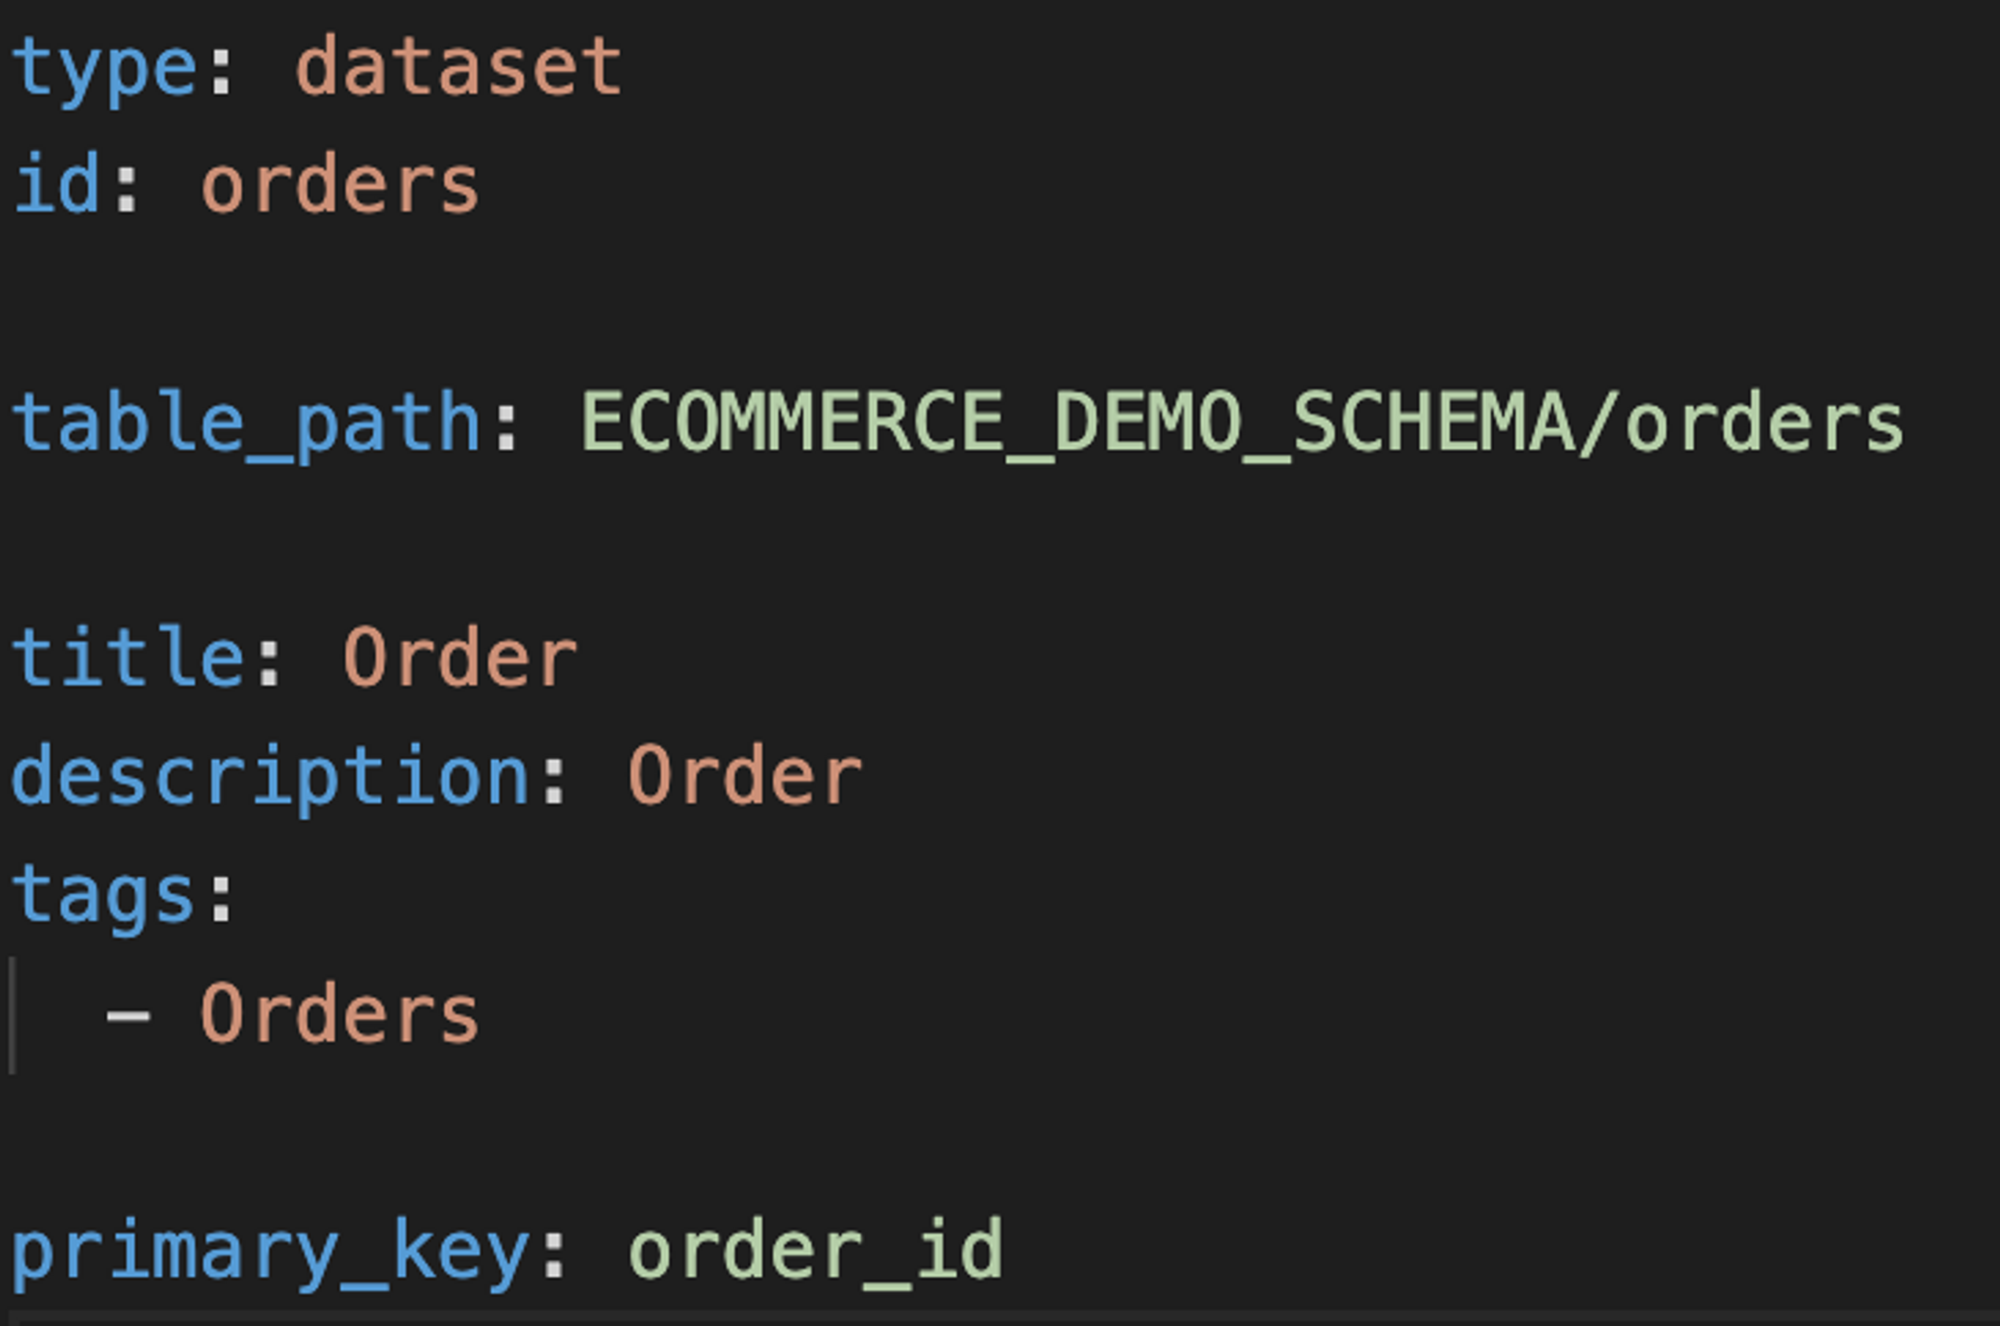 Notice the identifiers (e.g., order_id) have a distinct color from the rest of the YAML.